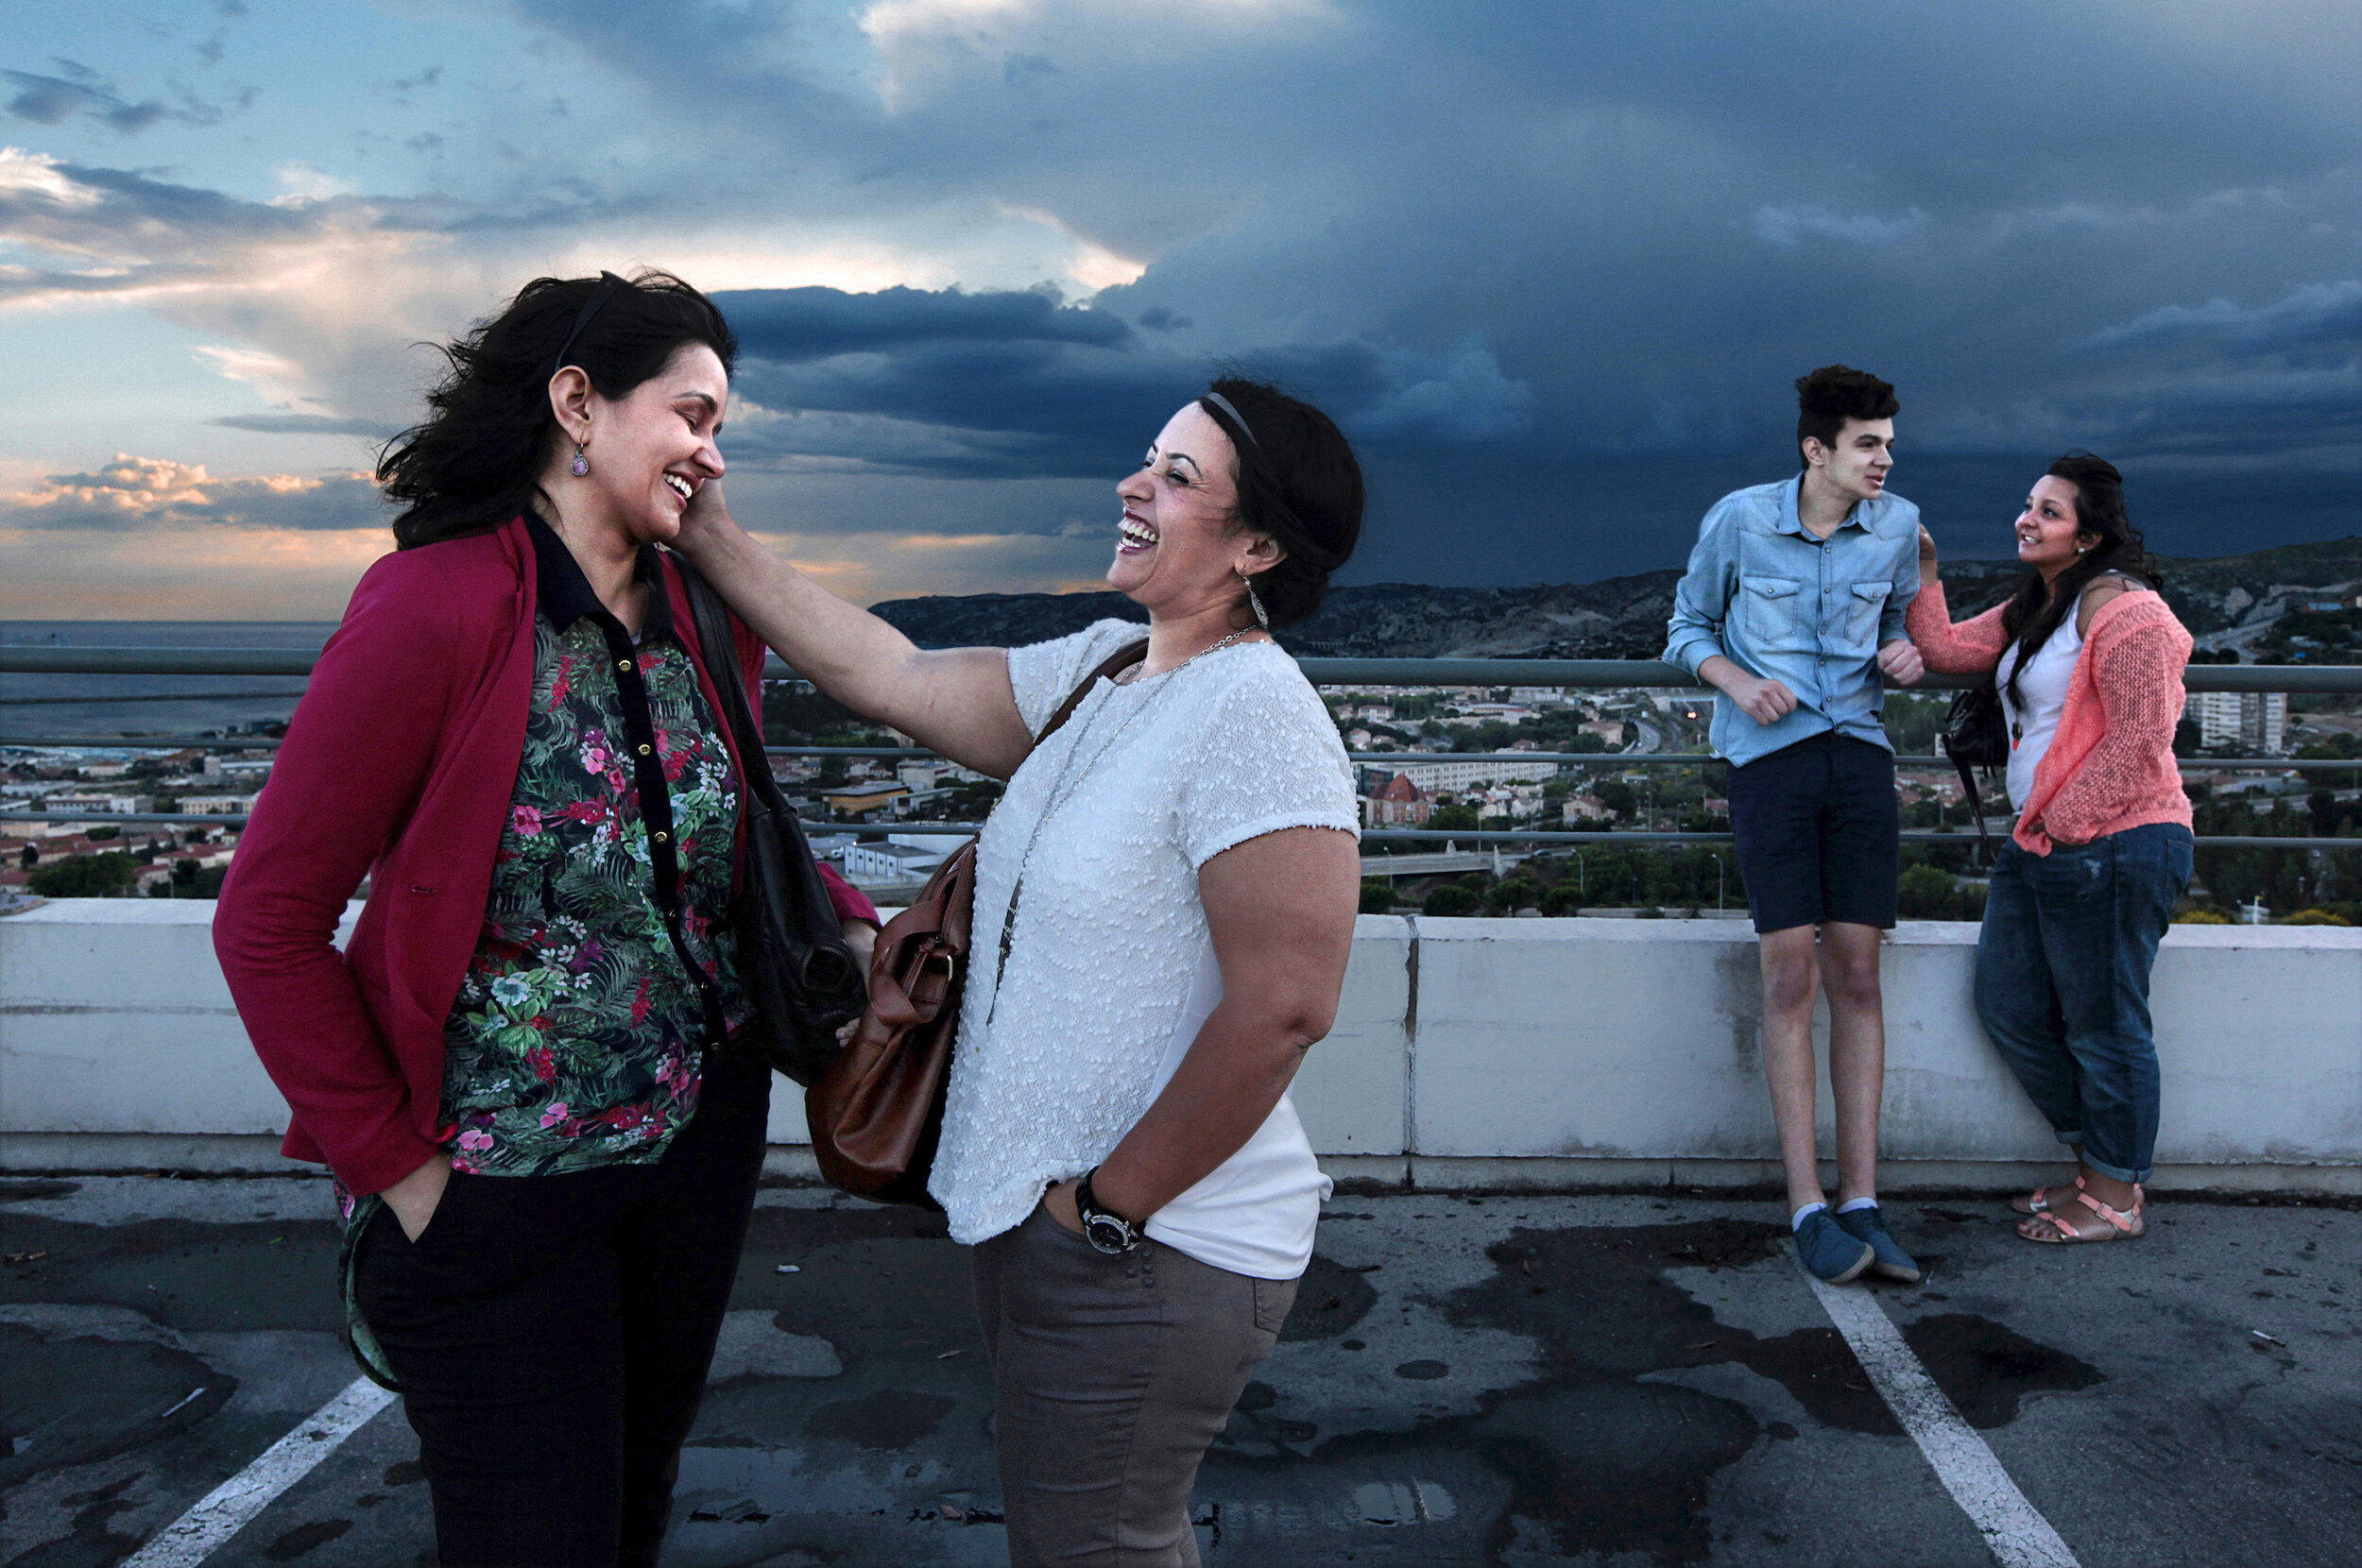   France. Marseille. 2014. Sisters share a joke outside The Grand Littoral shopping center.        